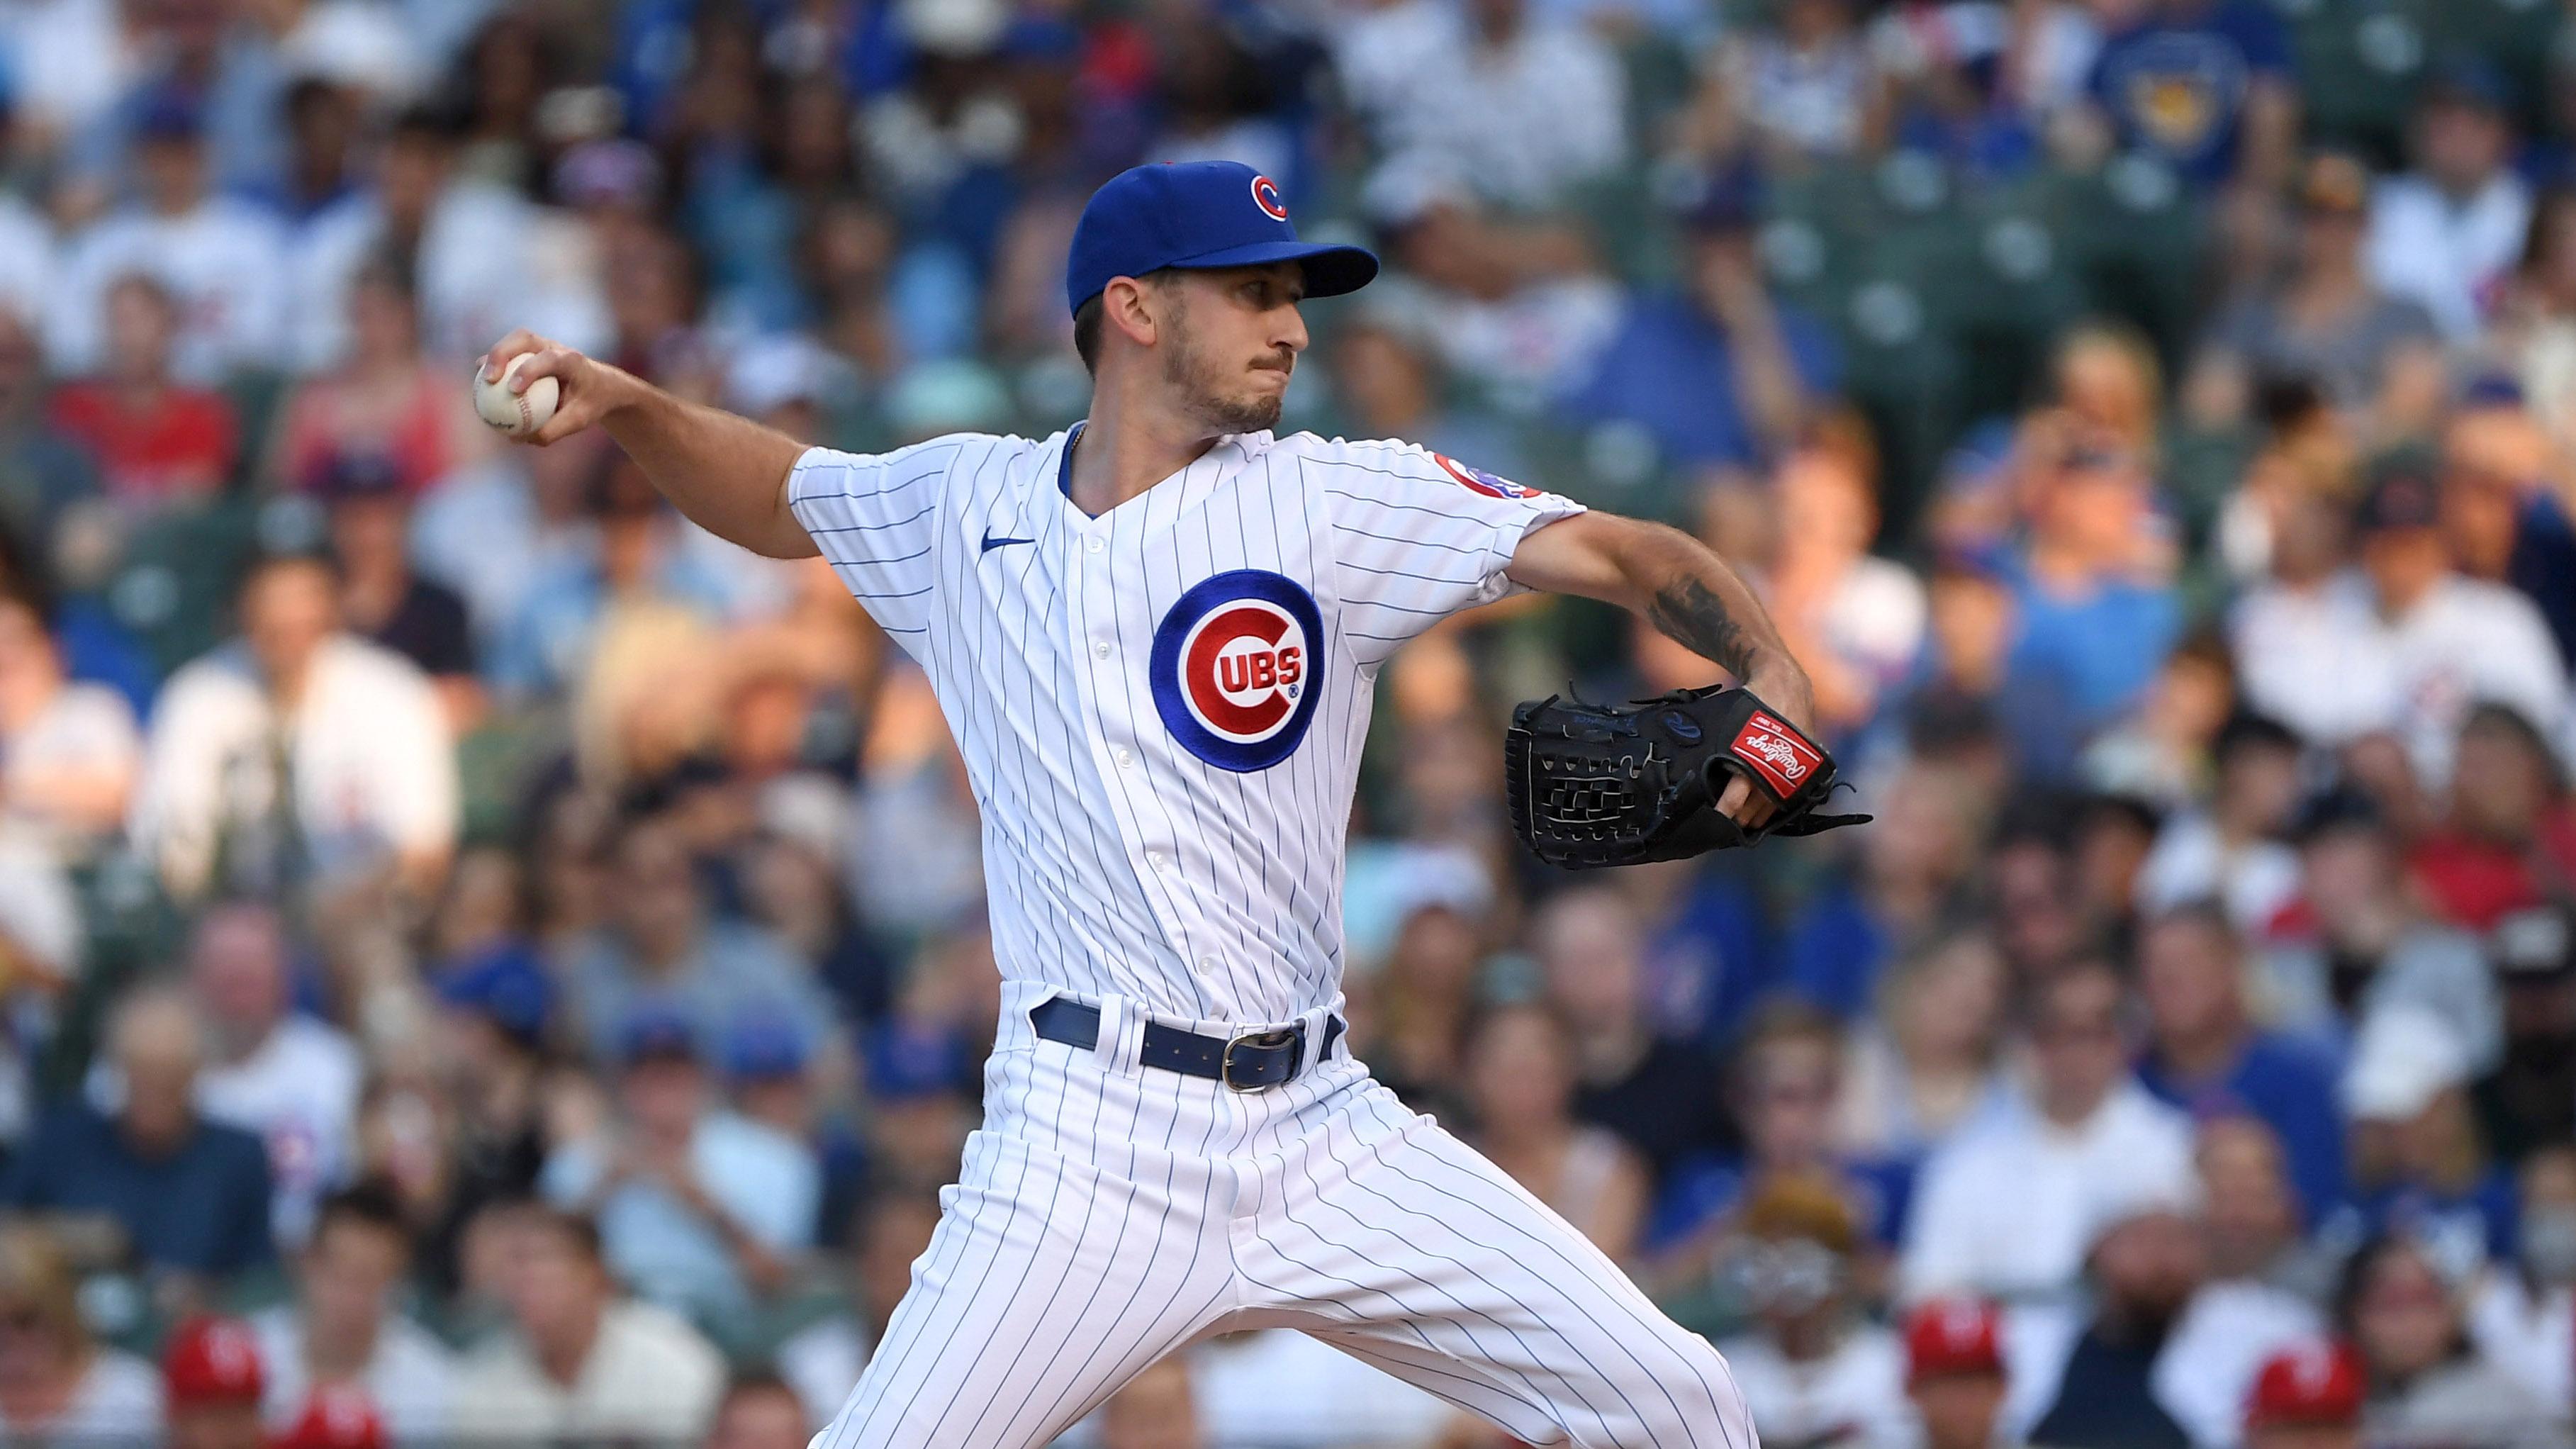 Chicago Cubs starting pitcher Zach Davies (27) pitches in the first inning against the Philadelphia Phillies at Wrigley Field. / Quinn Harris - USA TODAY Sports